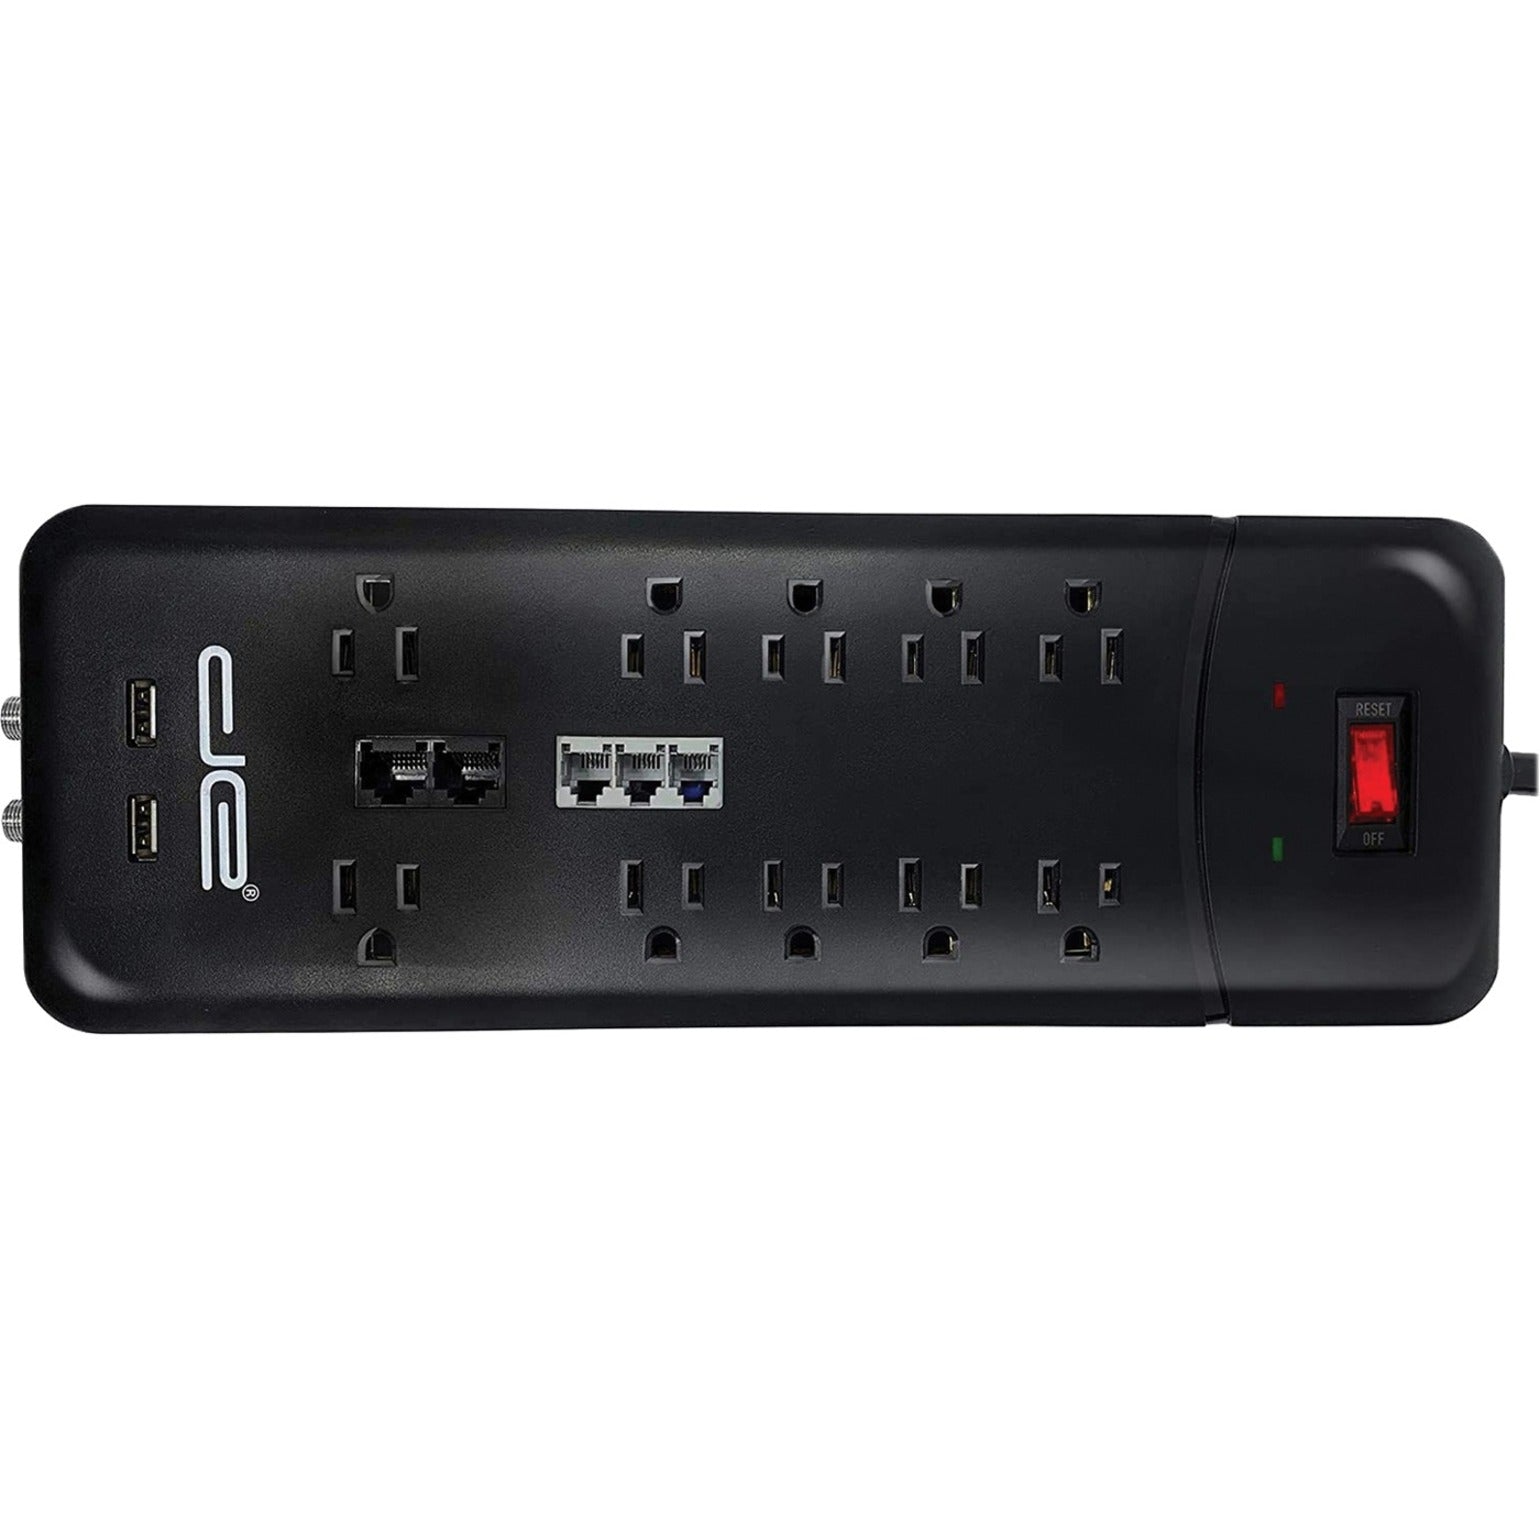 Digital Energy World DSS5-1034-BLK 10-Outlet Surge Protector Power Strip with USB Ports, Coaxial, Phone, and Modem Protection